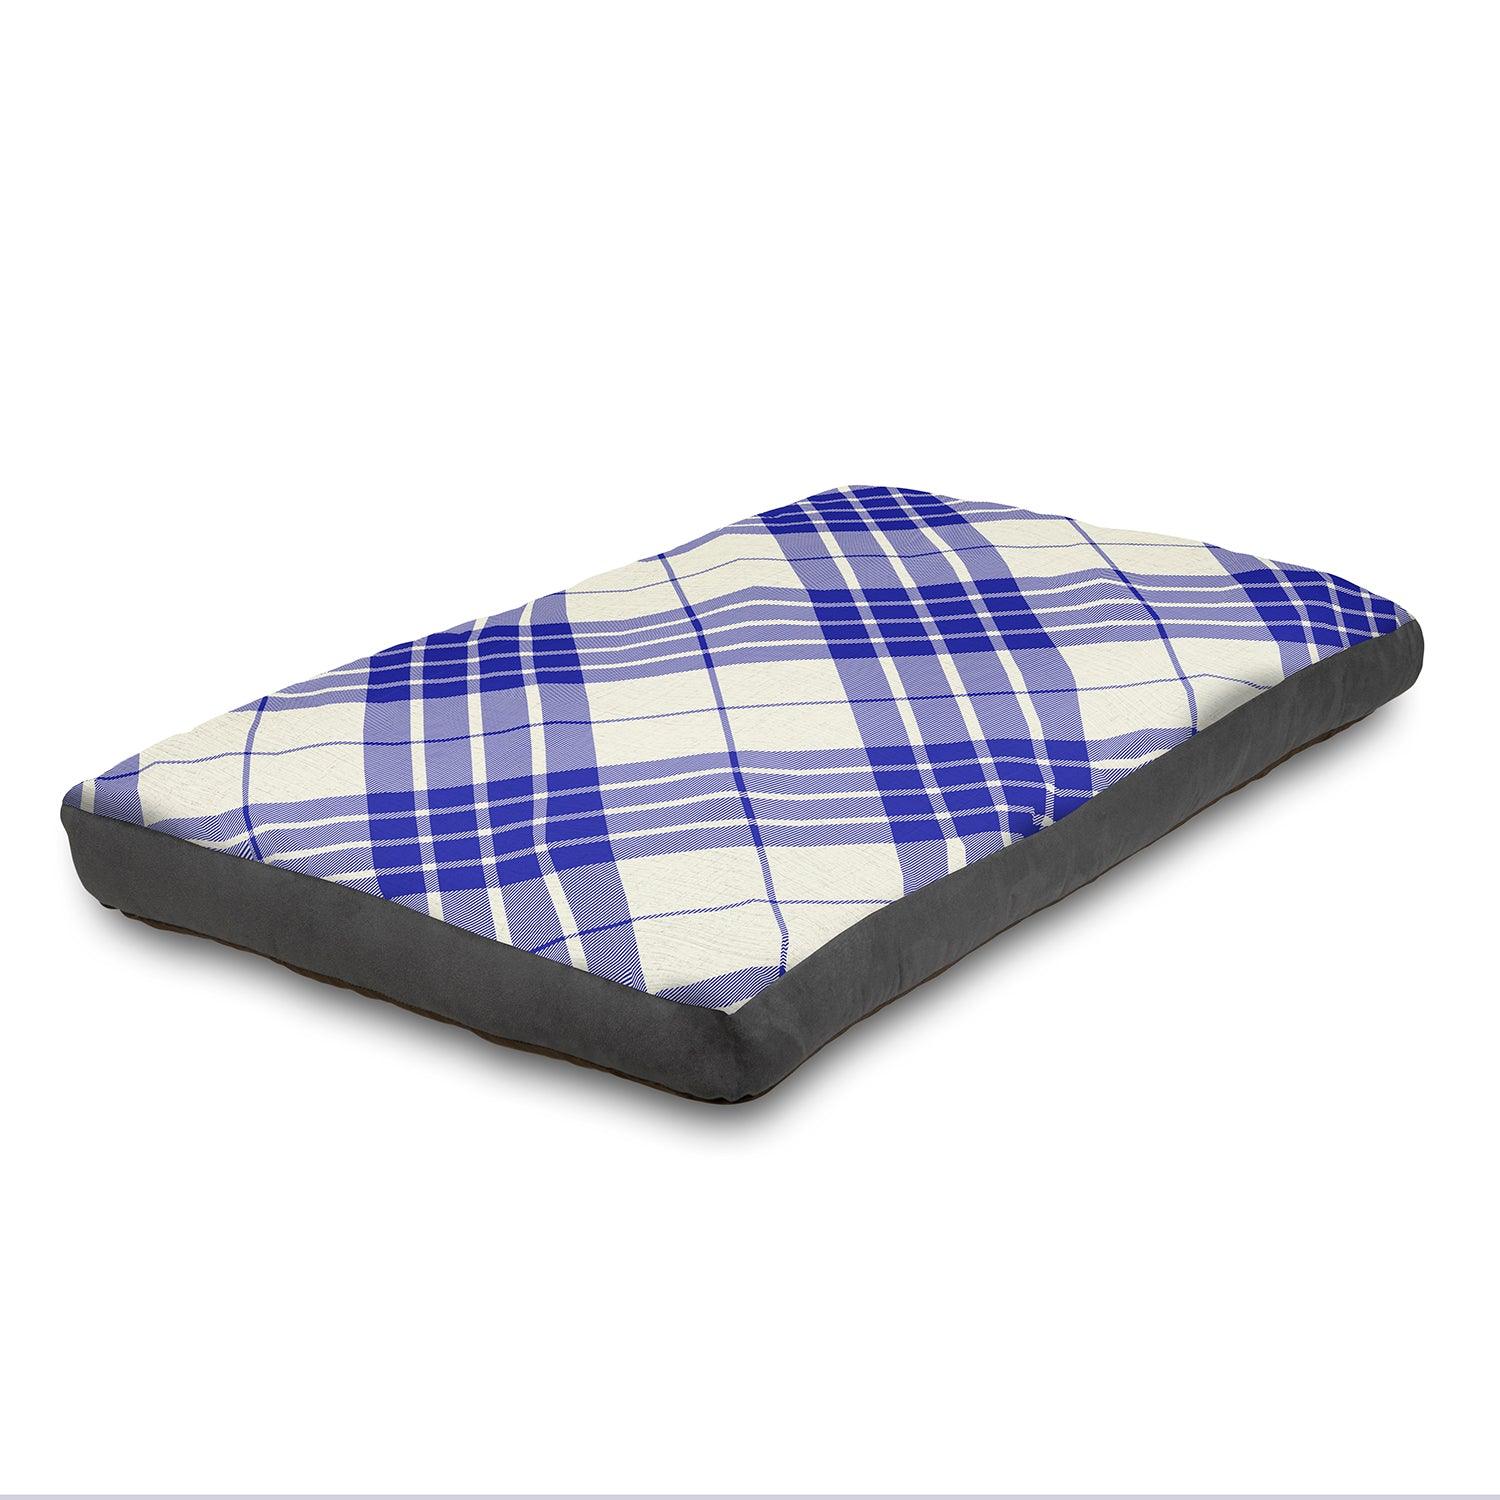 View Super Comfy Dog Bed Soft and Fluffy with Washable Cover Large 125 cm x 85 cm Blue information